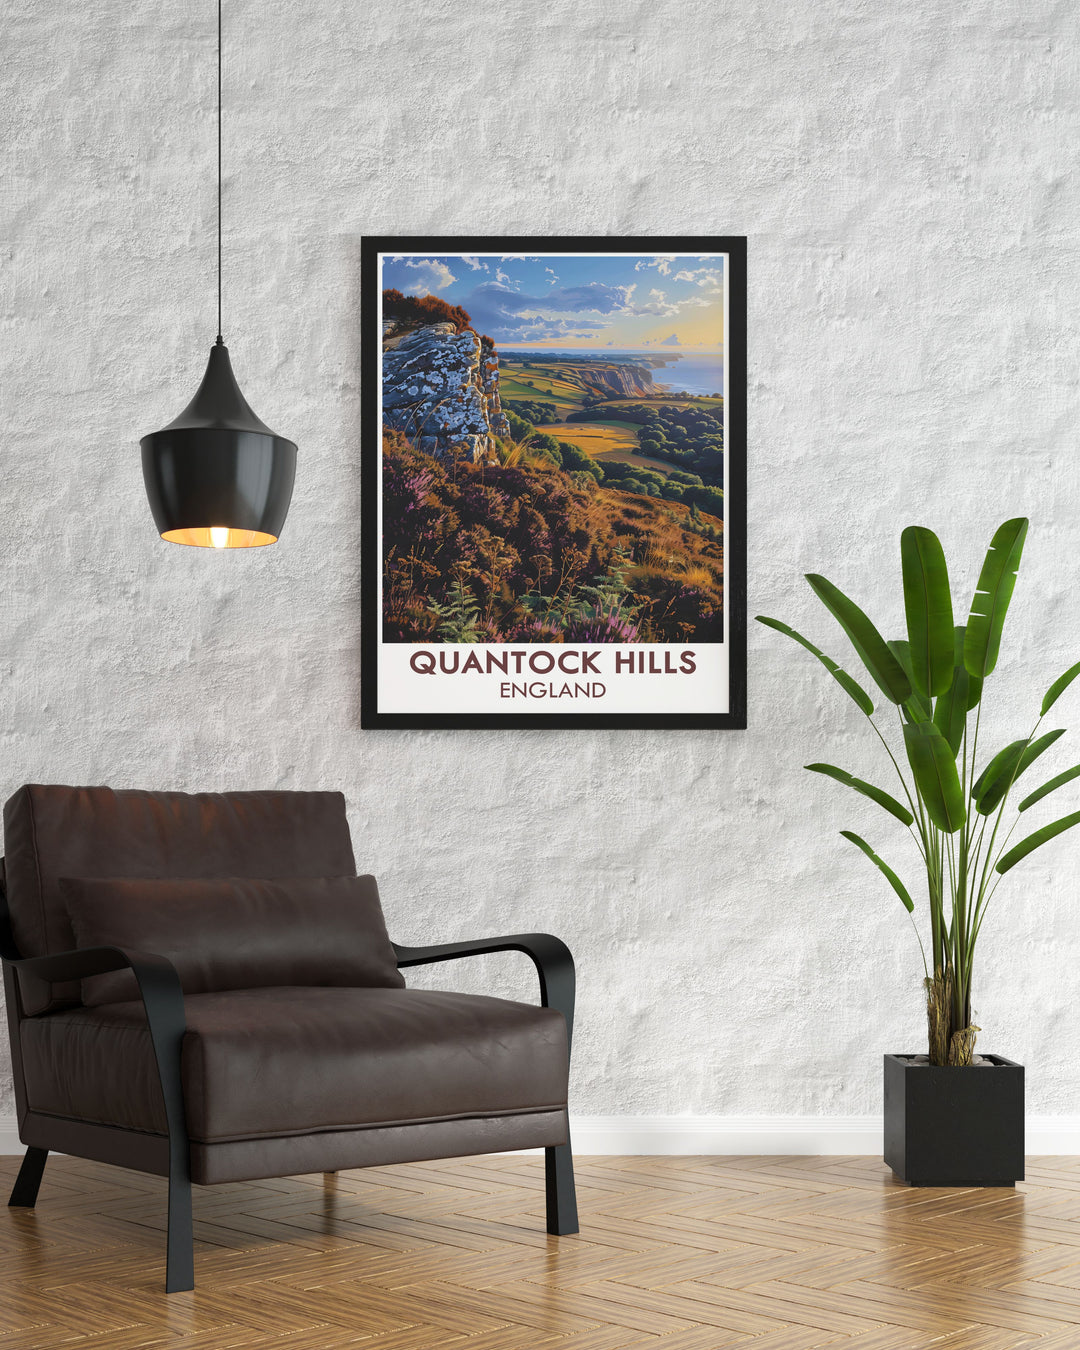 Wills Neck vintage travel poster featuring the tranquil landscapes of Quantock Hills and Somerset AONB ideal for adding a touch of rustic charm to any living space and capturing the essence of the Bristol Channel and The Quantocks.